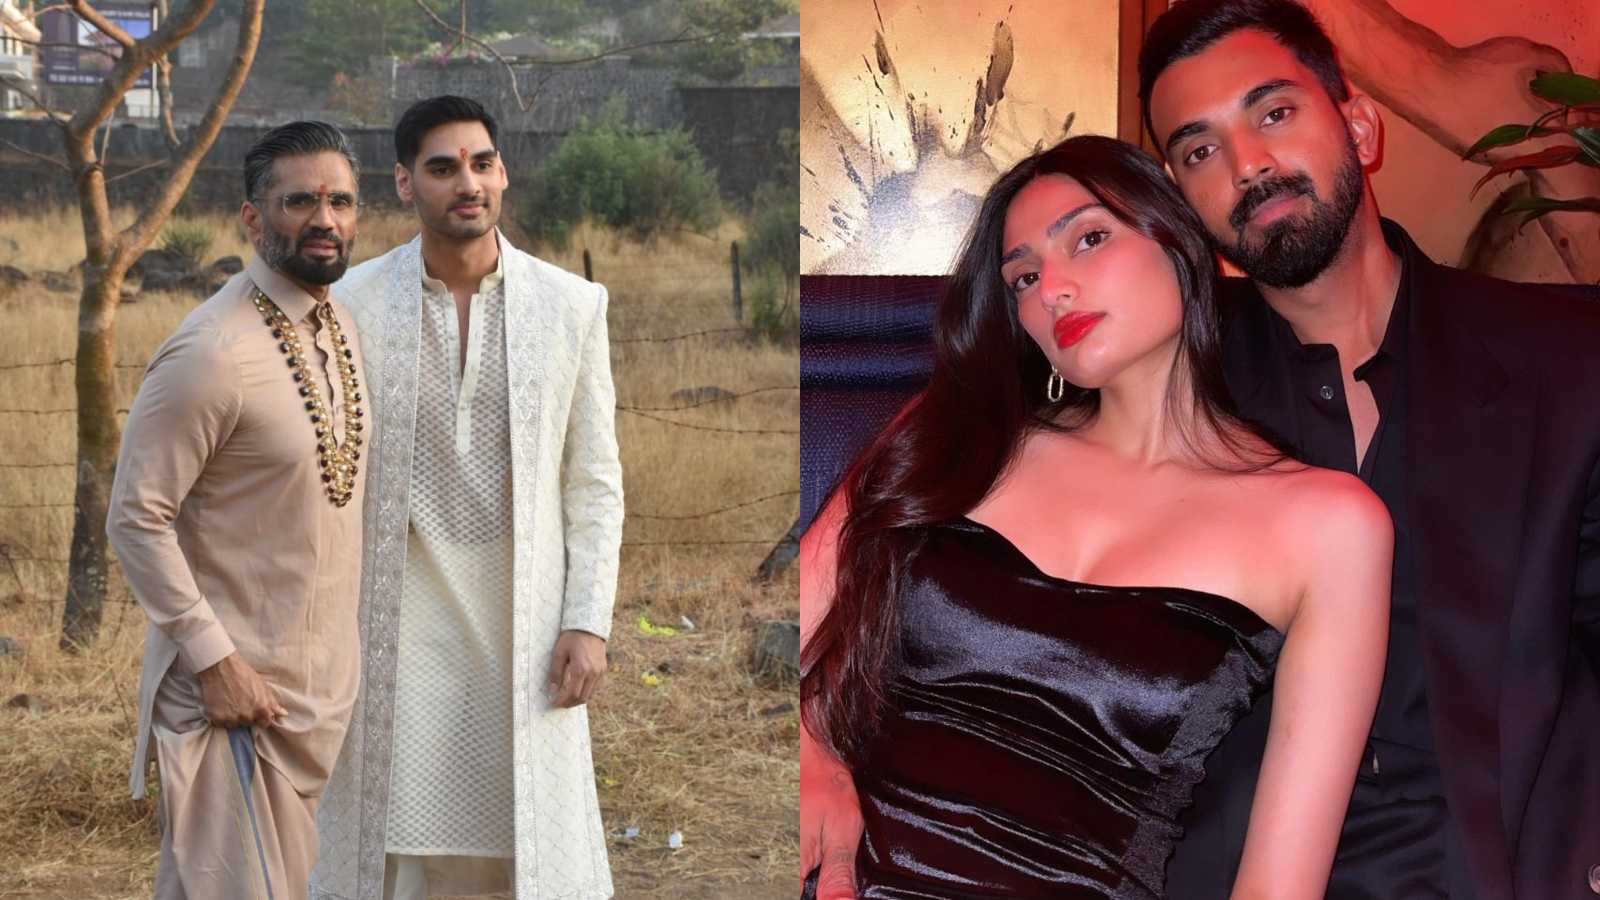 Athiya Shetty and KL Rahul are married confirms Suniel Shetty: 'Officially father-in-law ban chuka hoon'